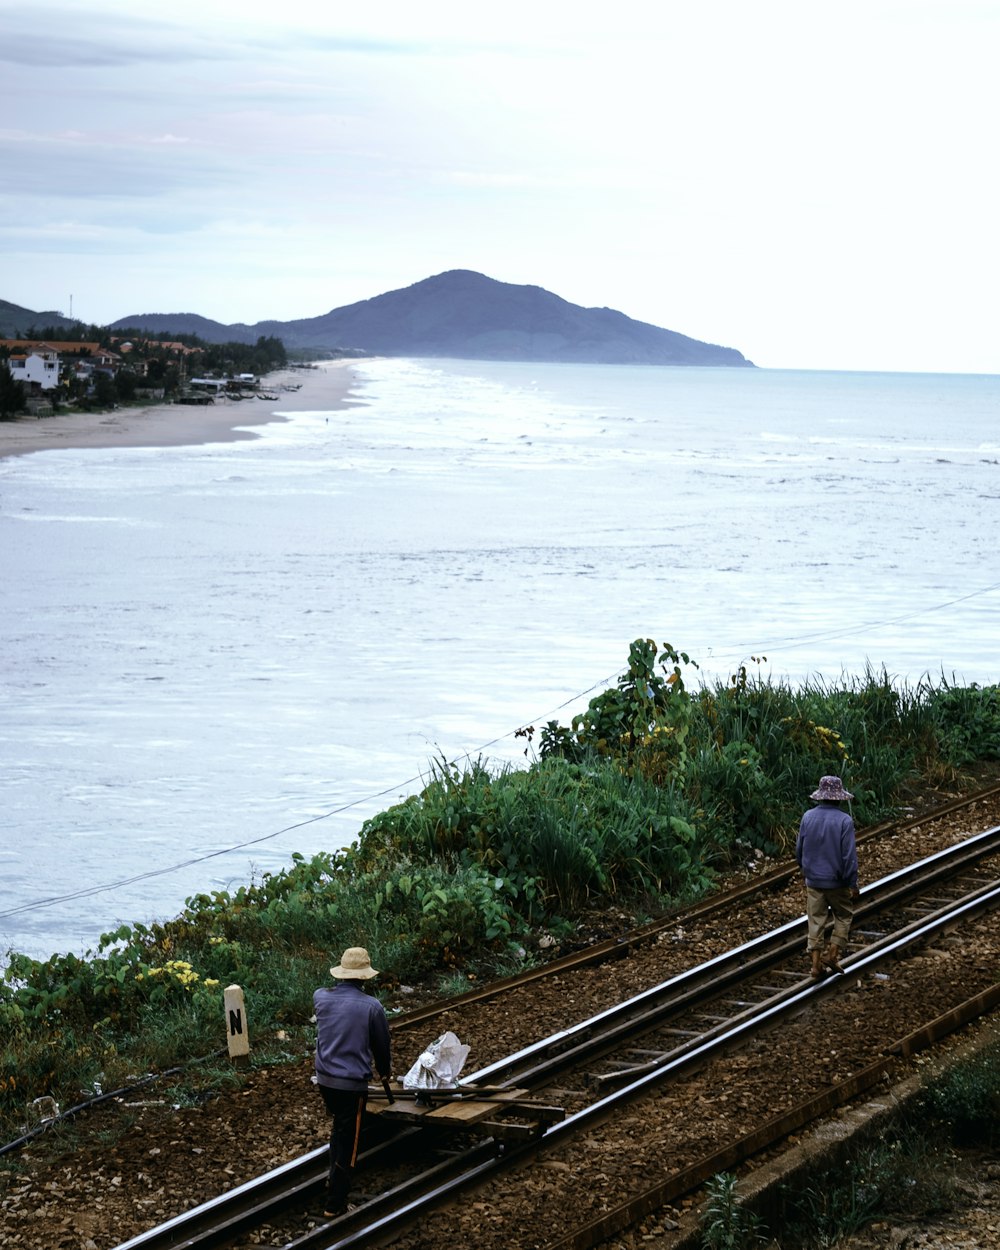 man and woman walking on train rail near body of water during daytime